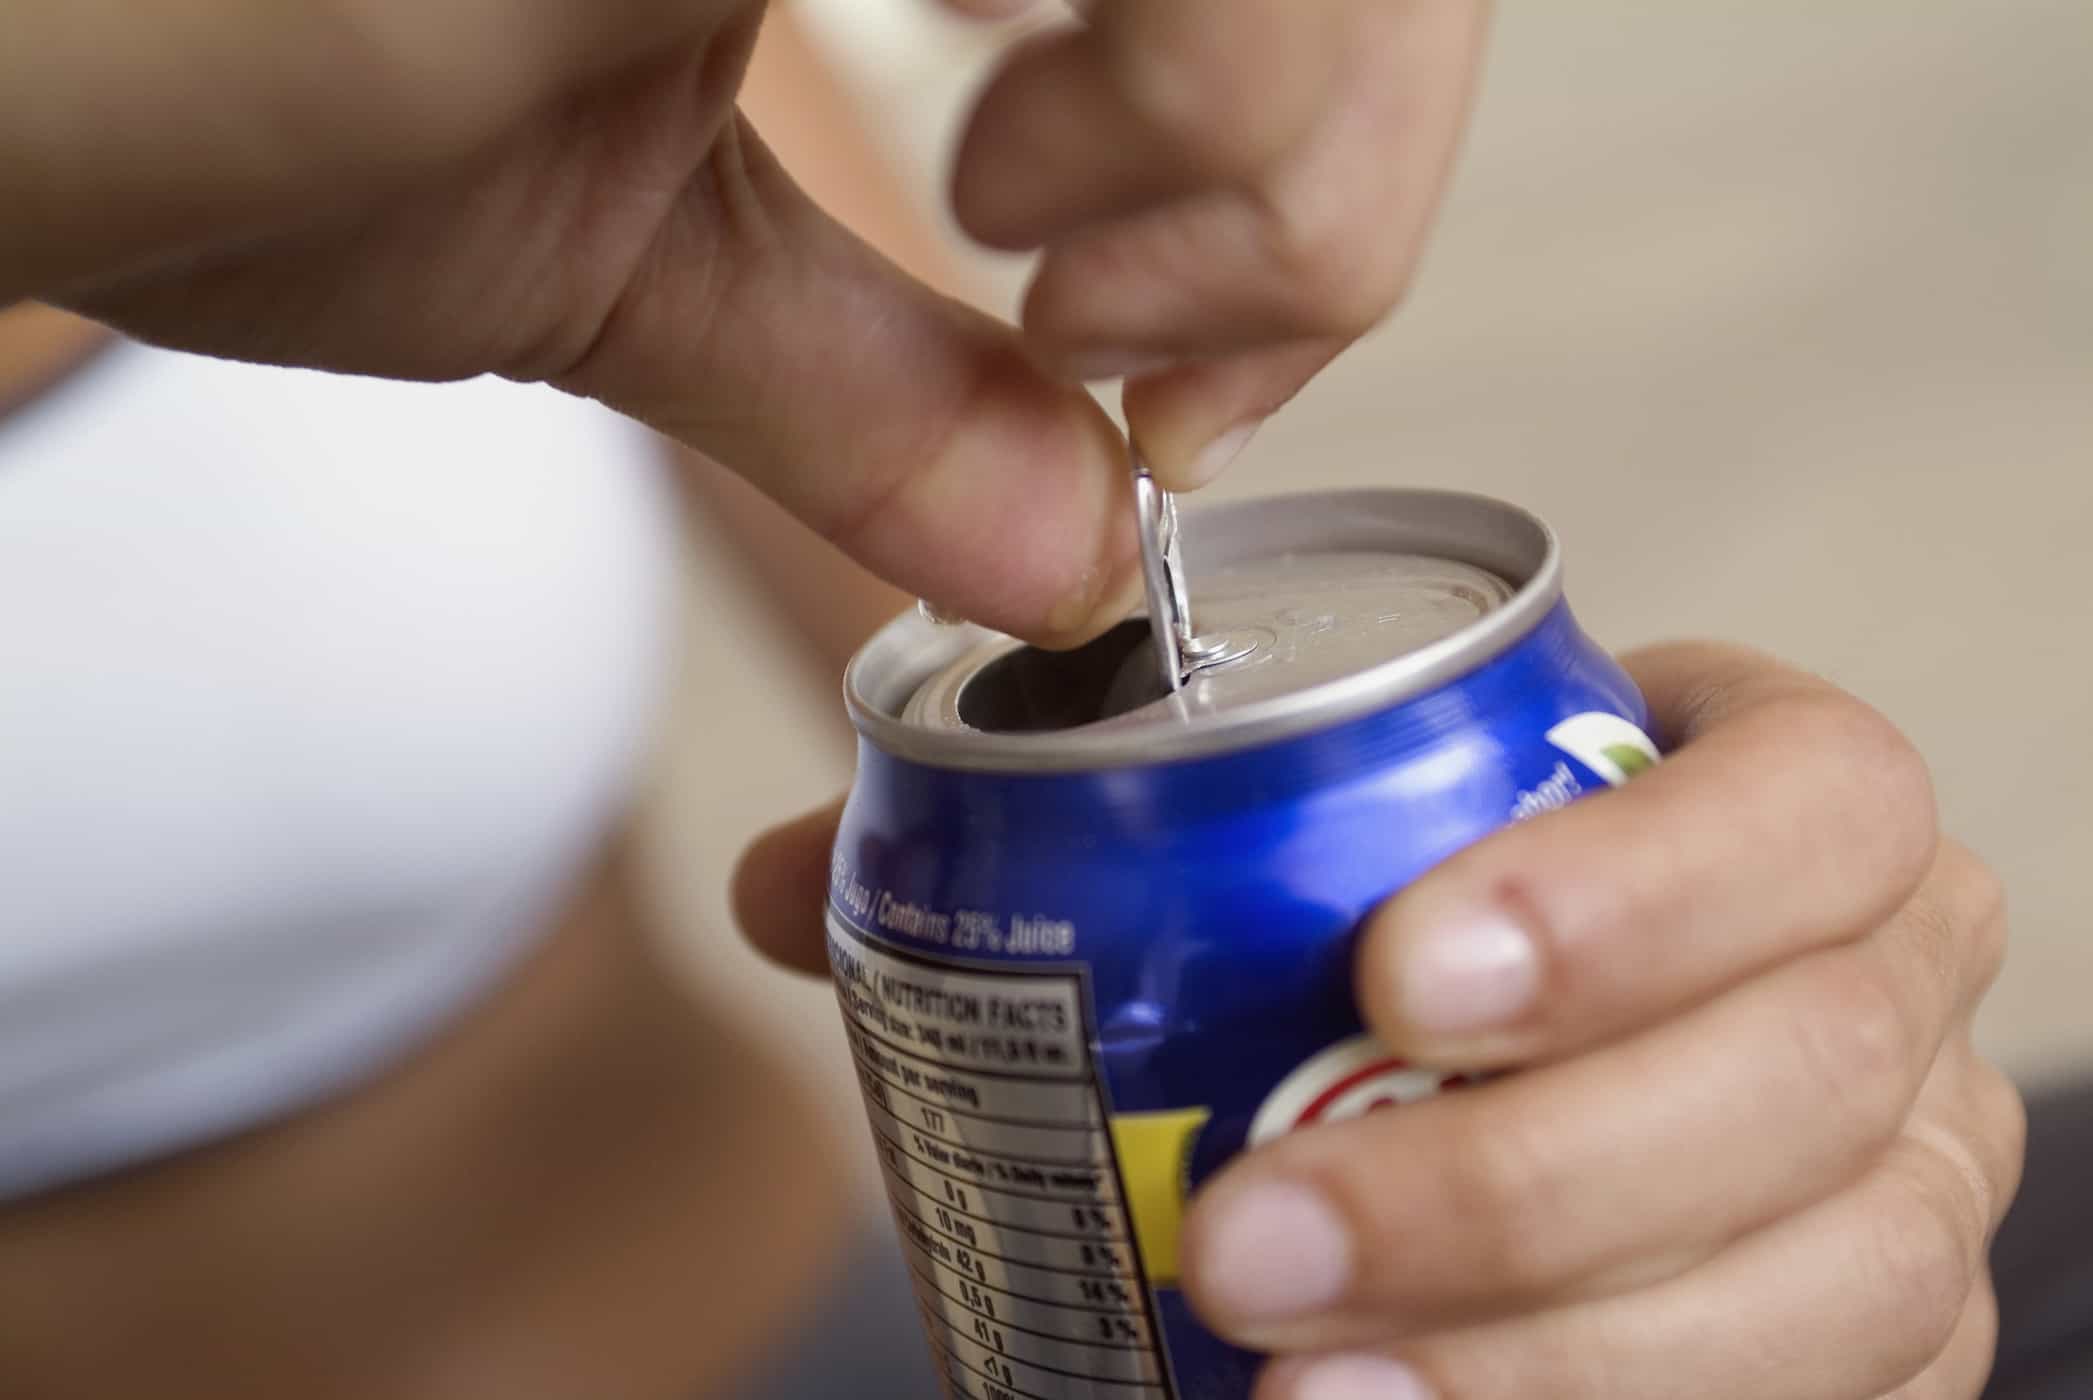 drinking soda during pregnancy may or may not